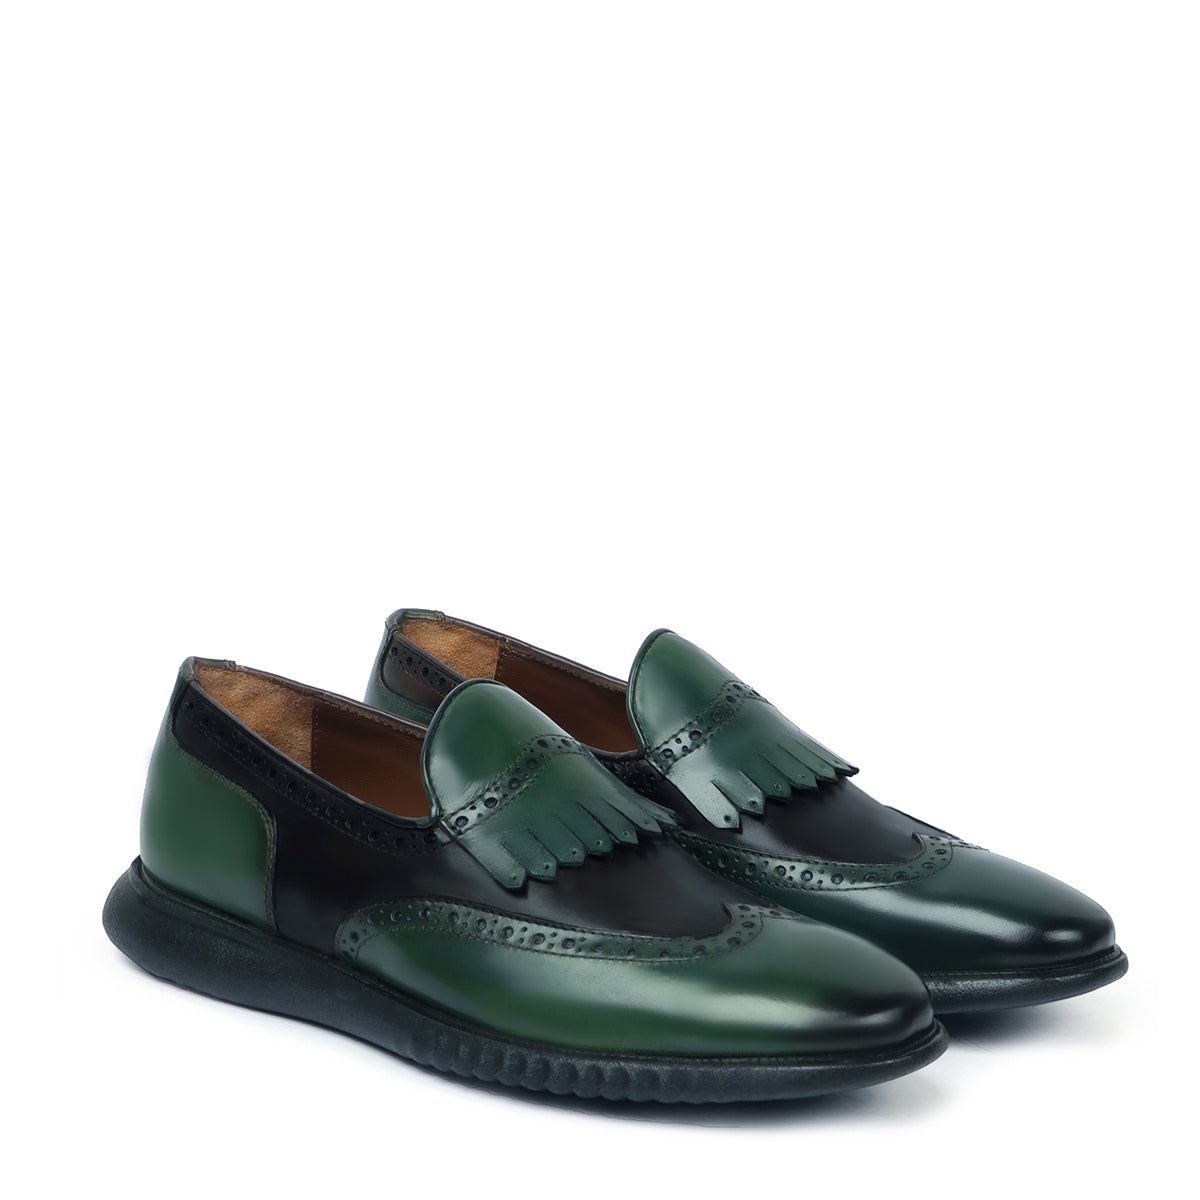 Dual Shade Light Weight Leather Loafer with Green-Dark Brown Wingtip Brogue Fringes